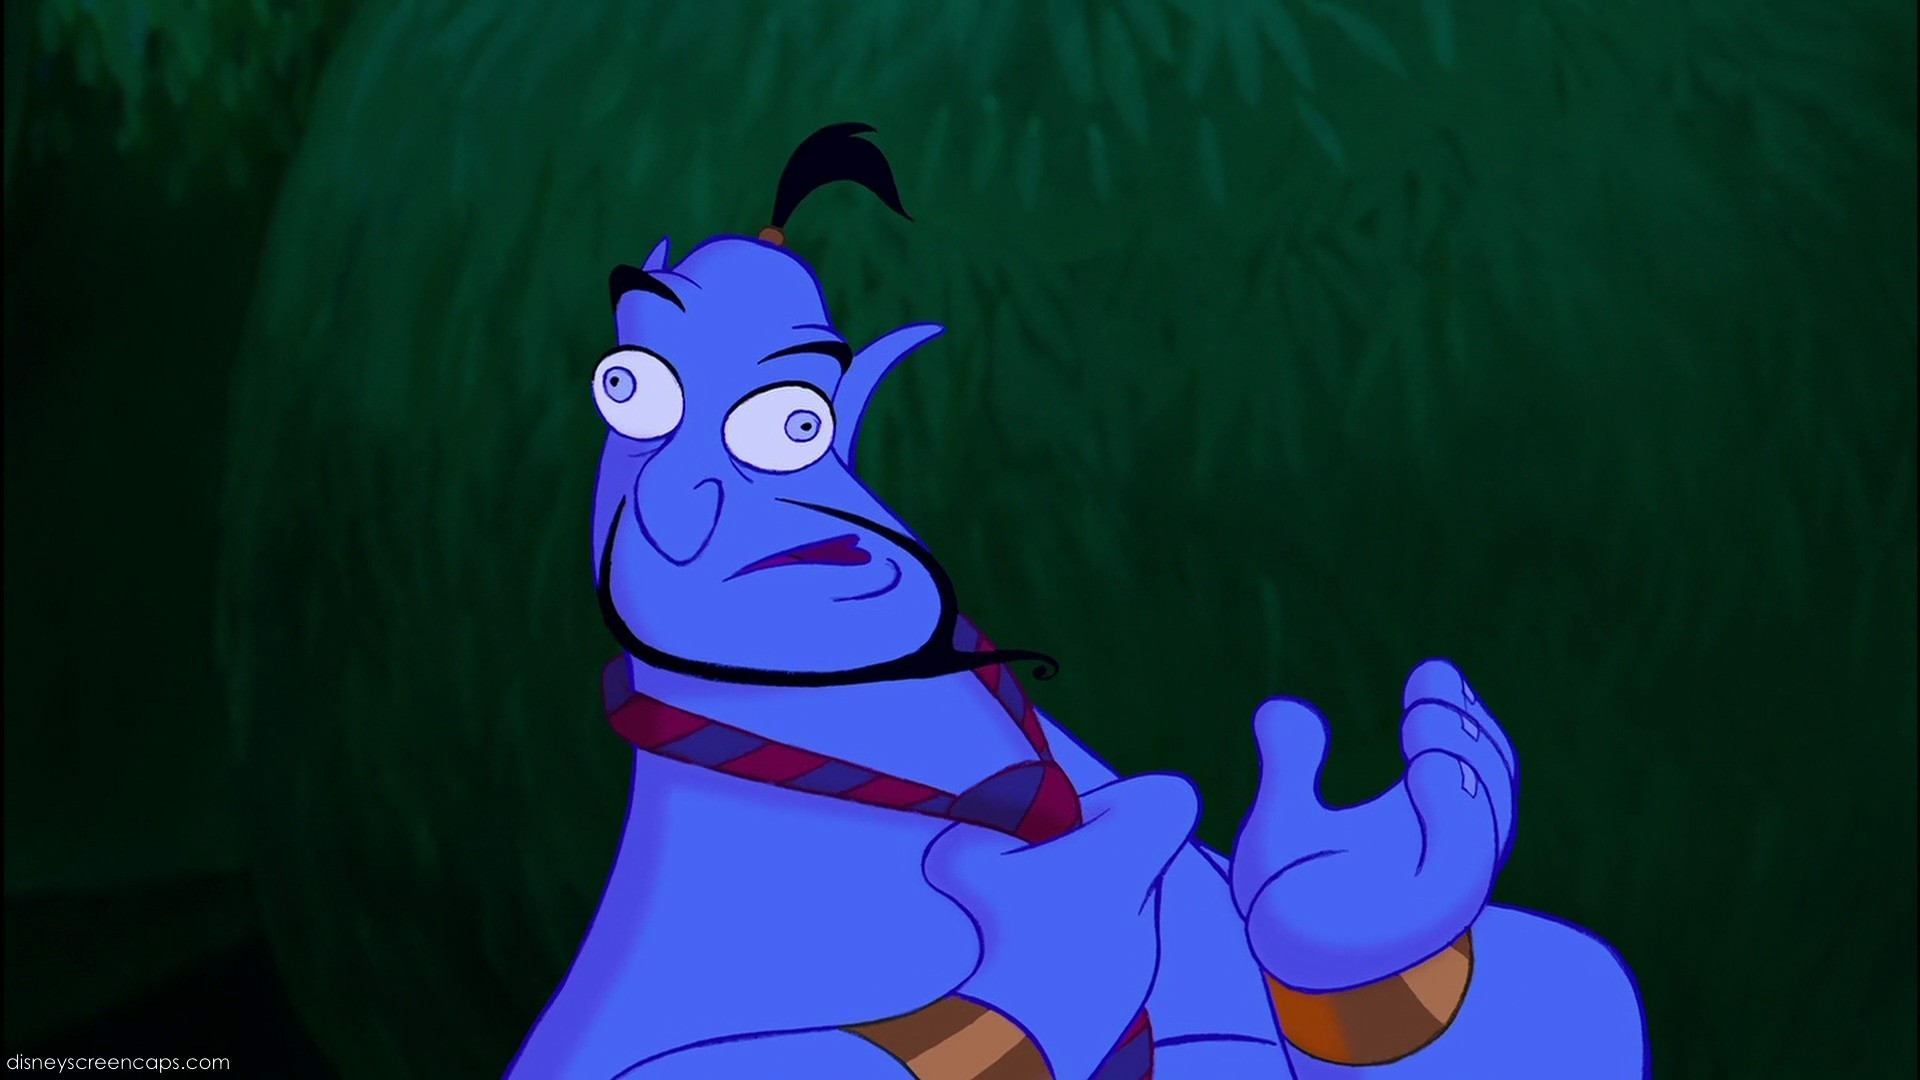 my-top-15-funniest-disney-characters-round-12-pick-the-least-funny